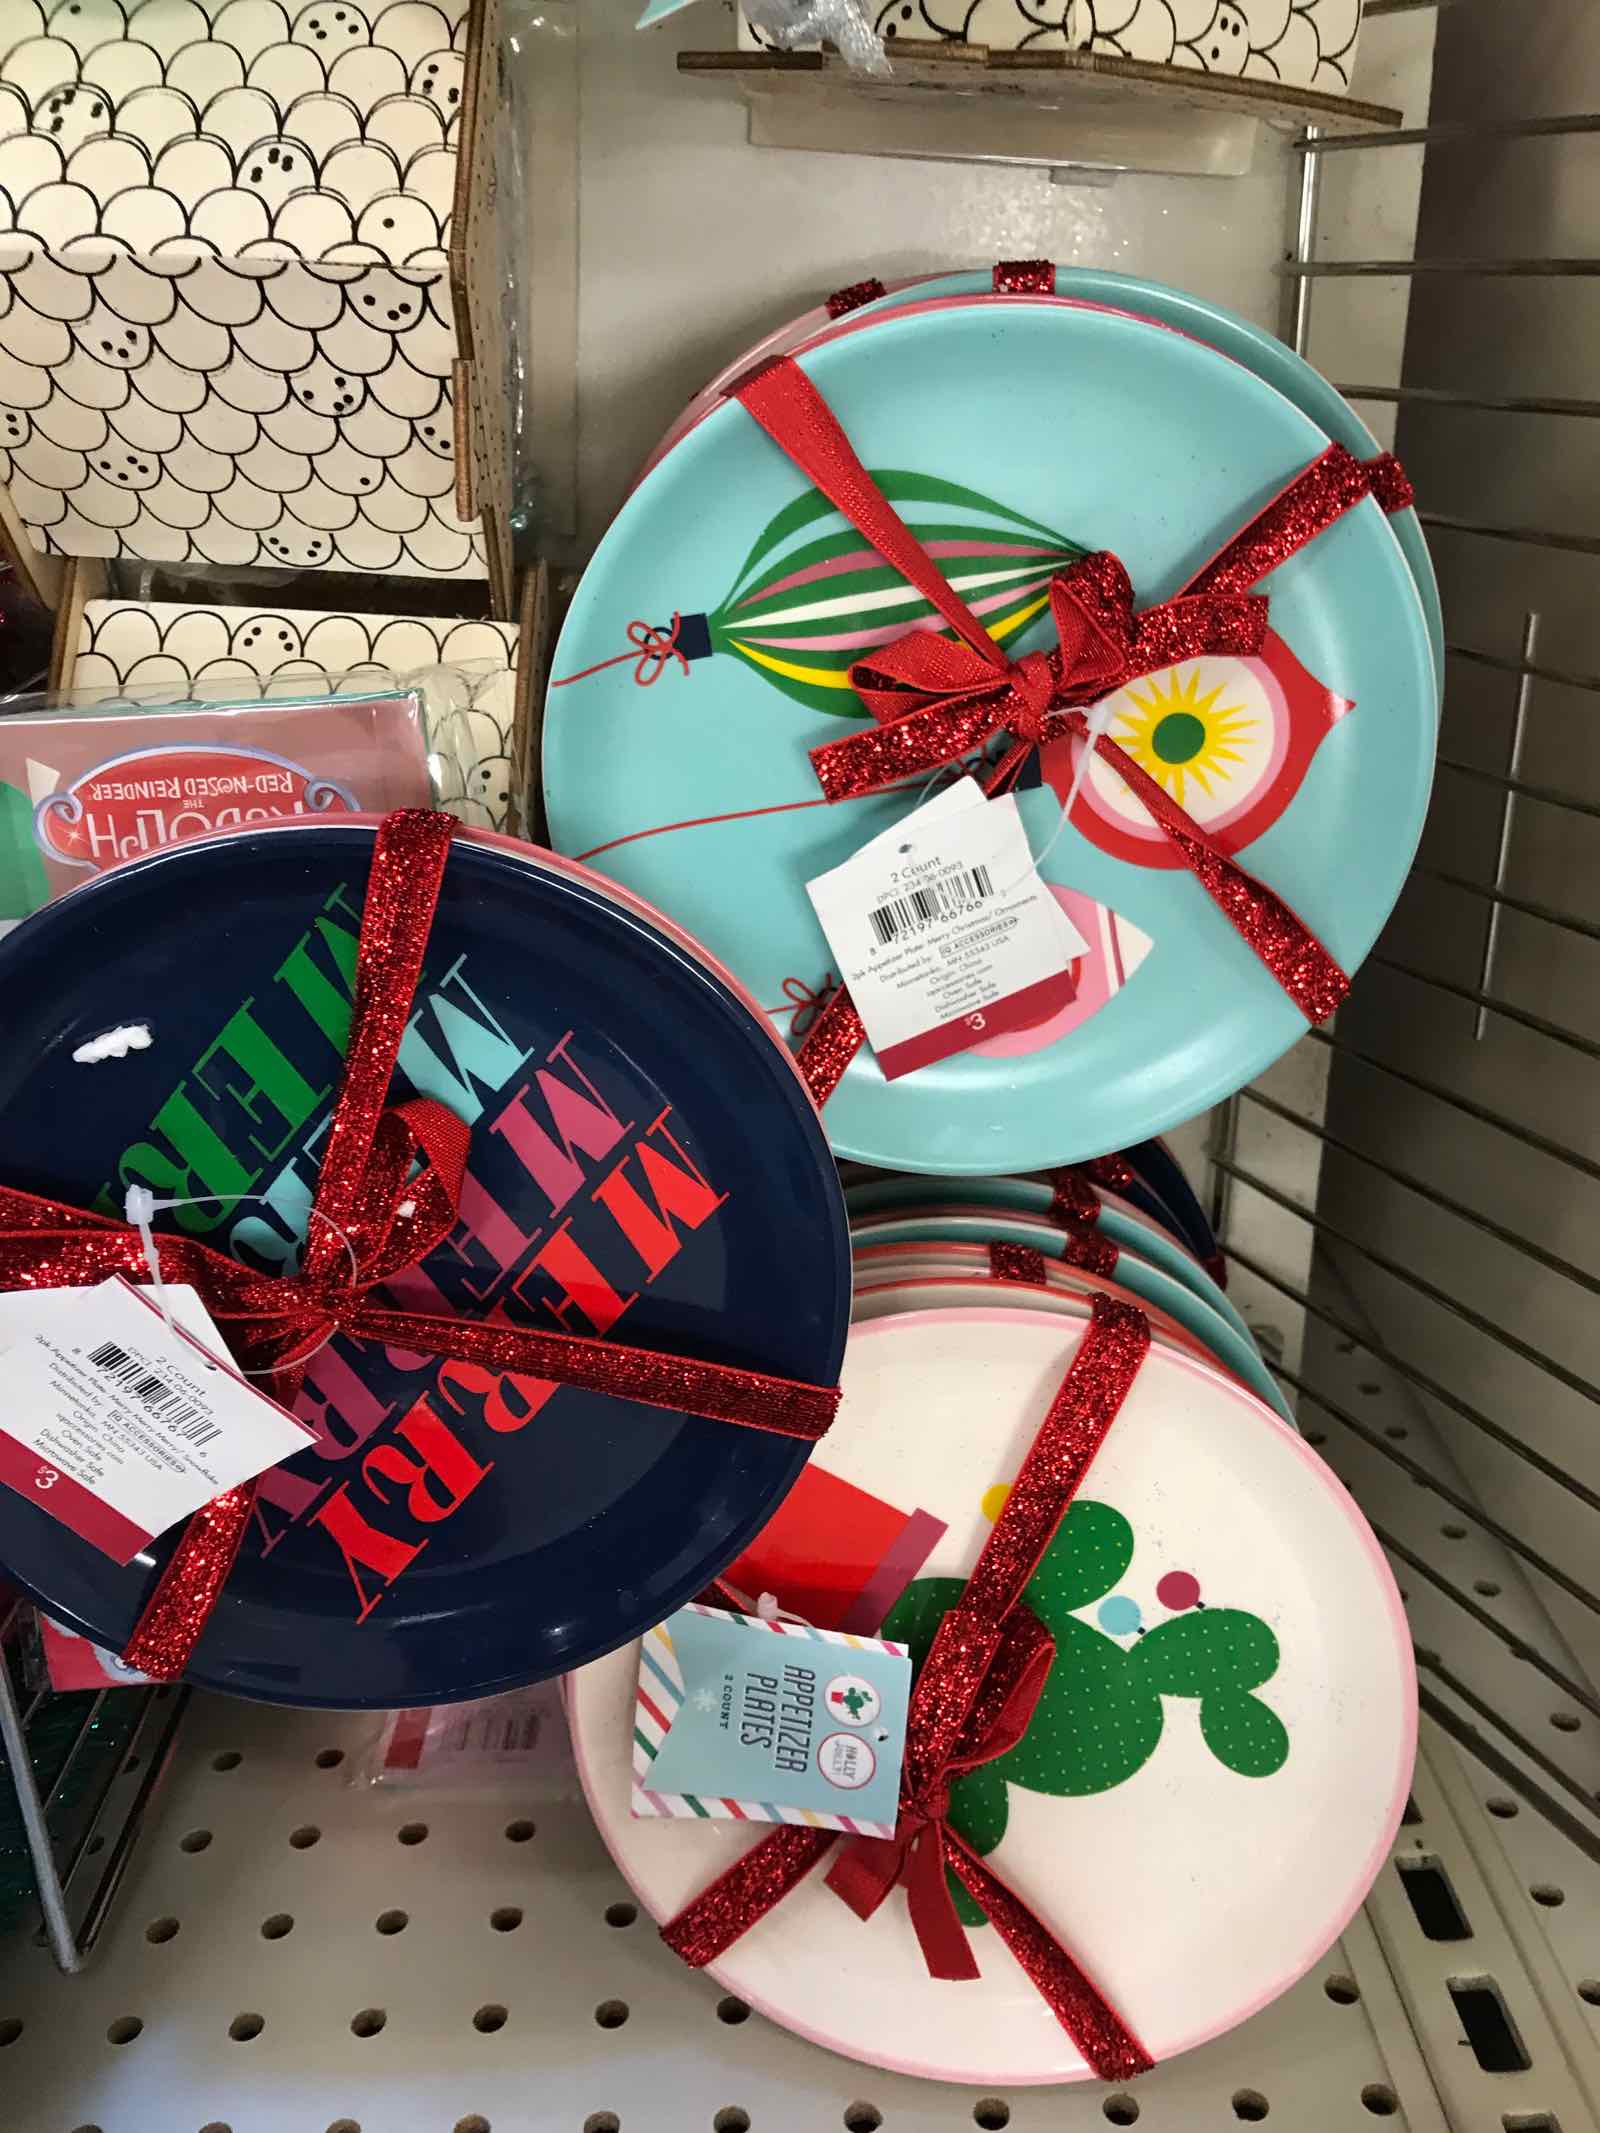 This blogger takes photos in the Target Dollar Spot - kinda want everything!